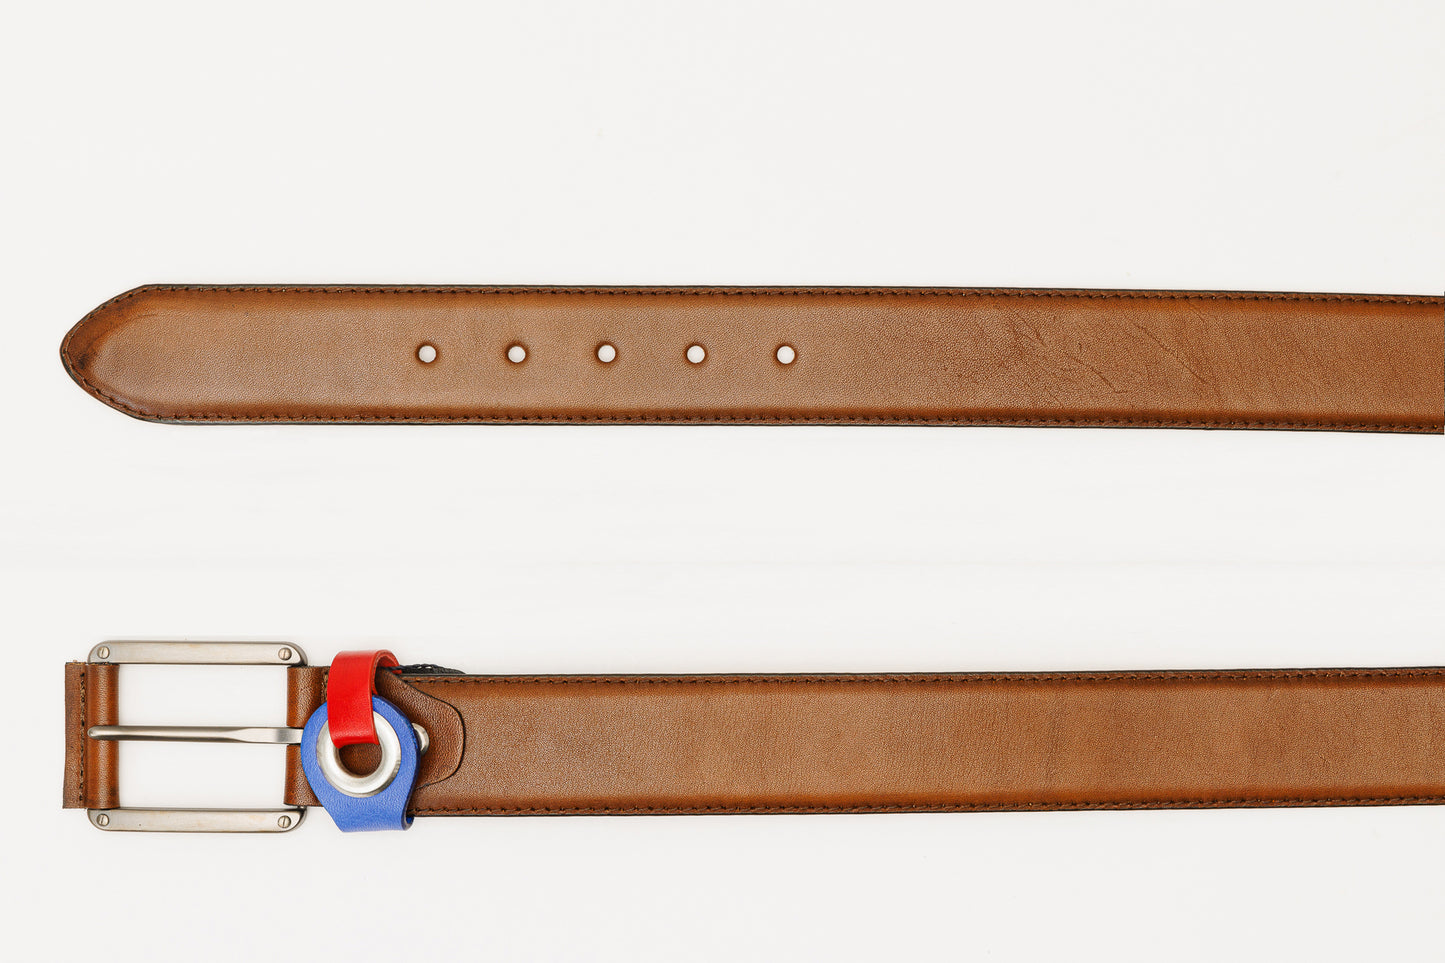 The Jackie Tan Leather Belt